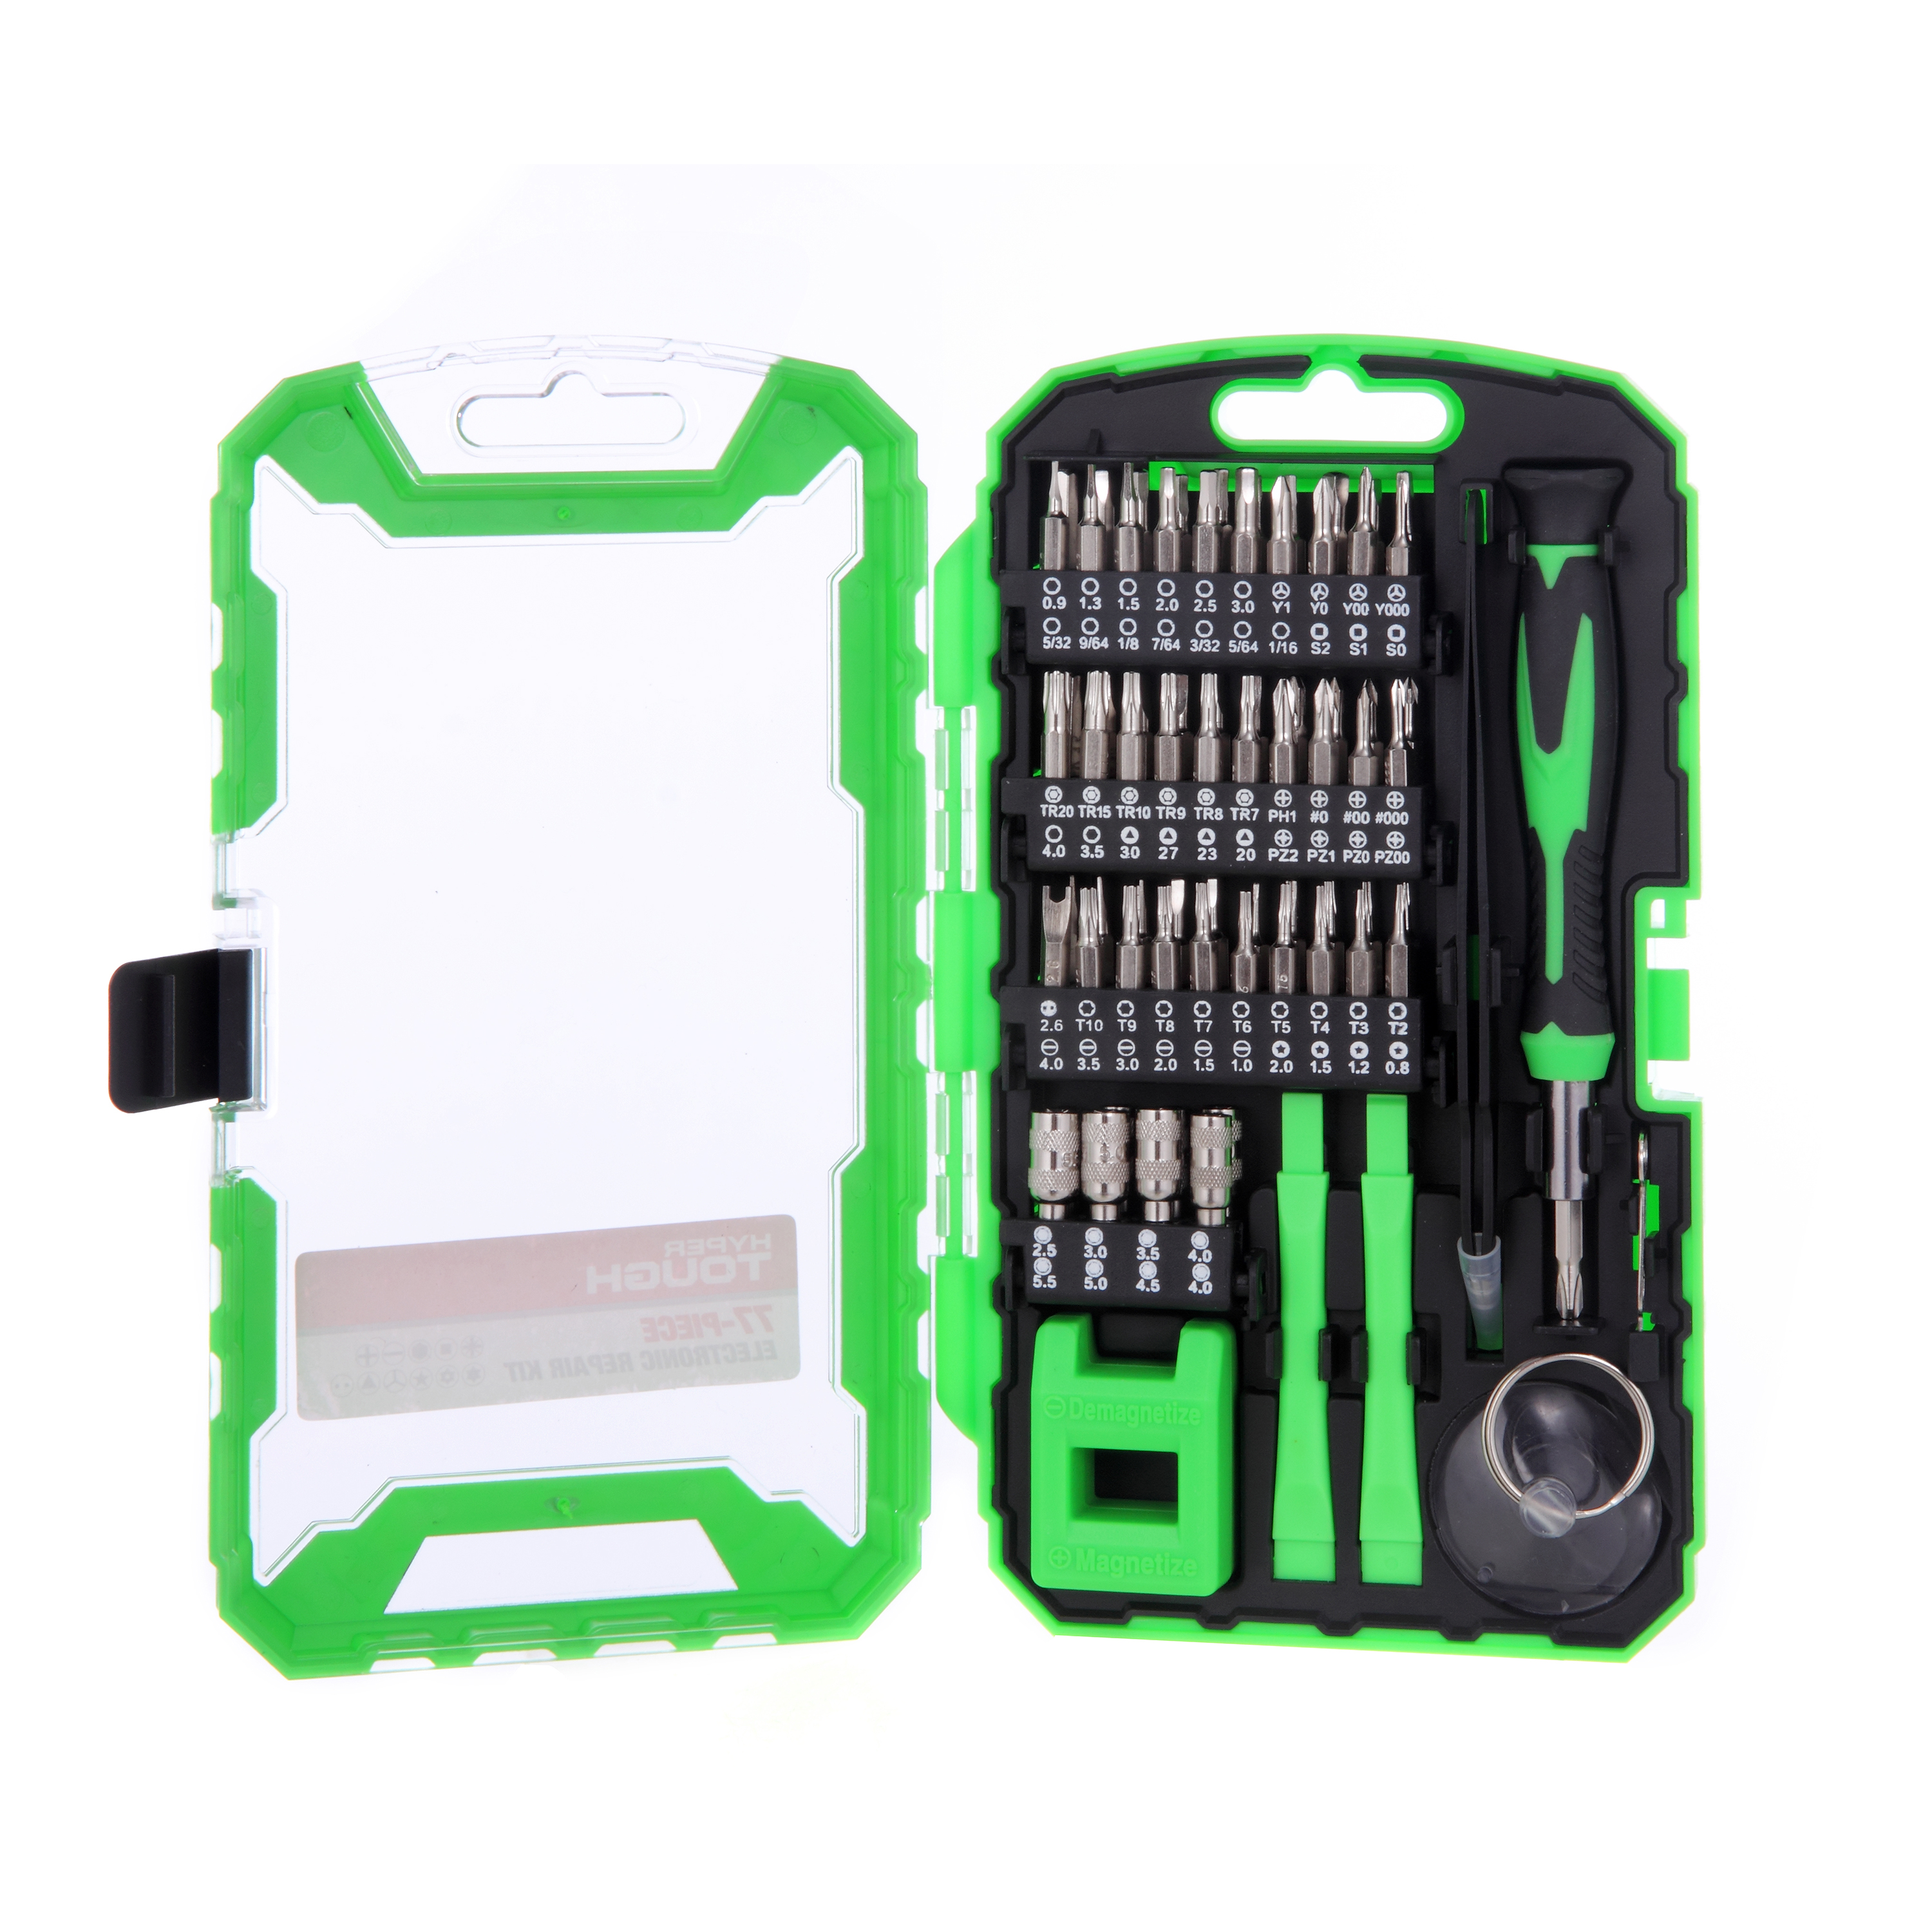 Hyper Tough 77 Piece Computer Repair Kit with Precision Bits and Storage Case TS85134A - image 1 of 9